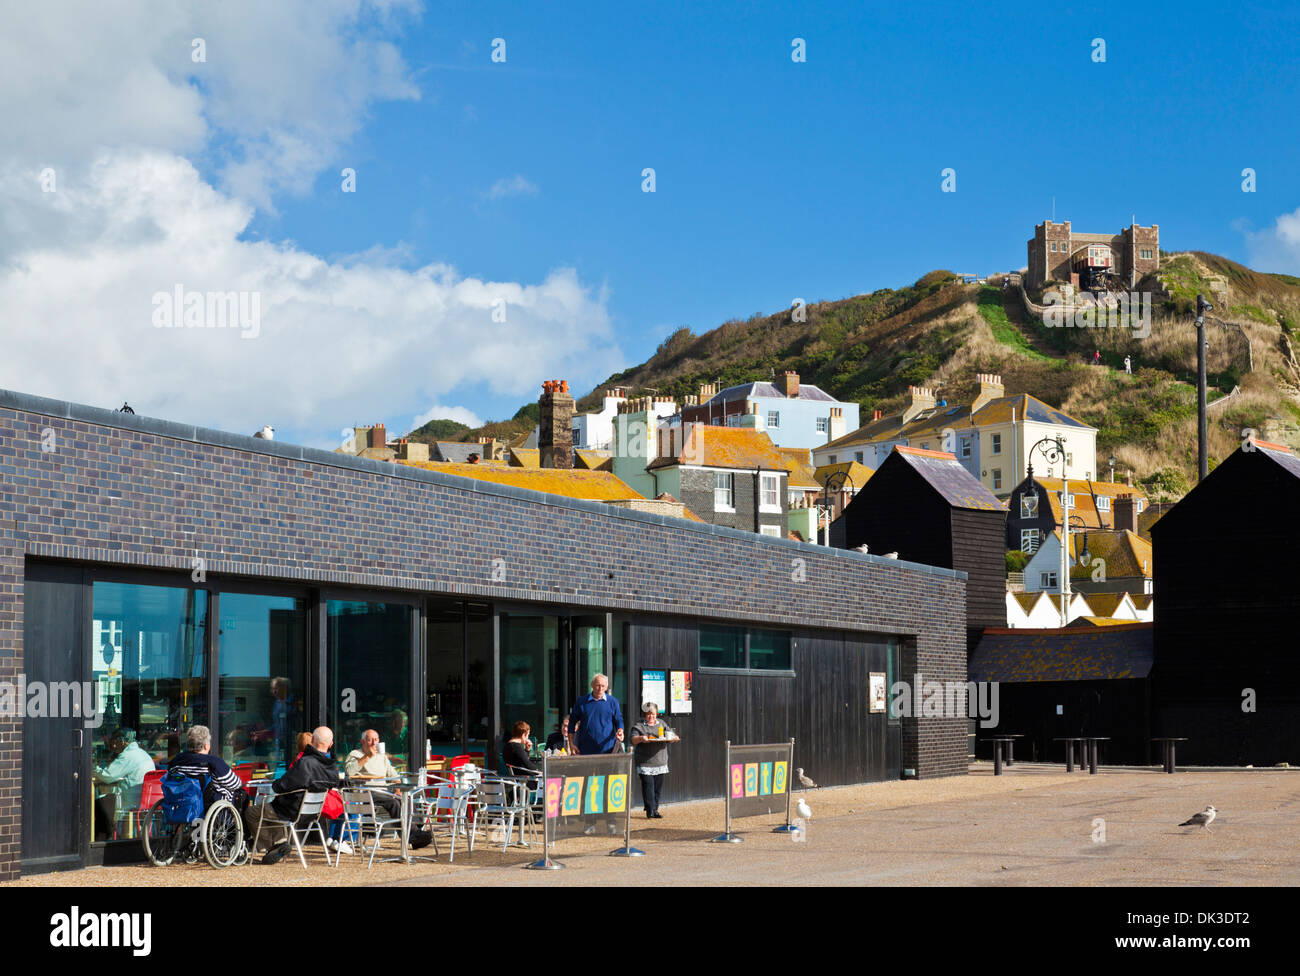 eat @ The Stade cafe Hastings seafront East Sussex England UK GB EU Europe Stock Photo